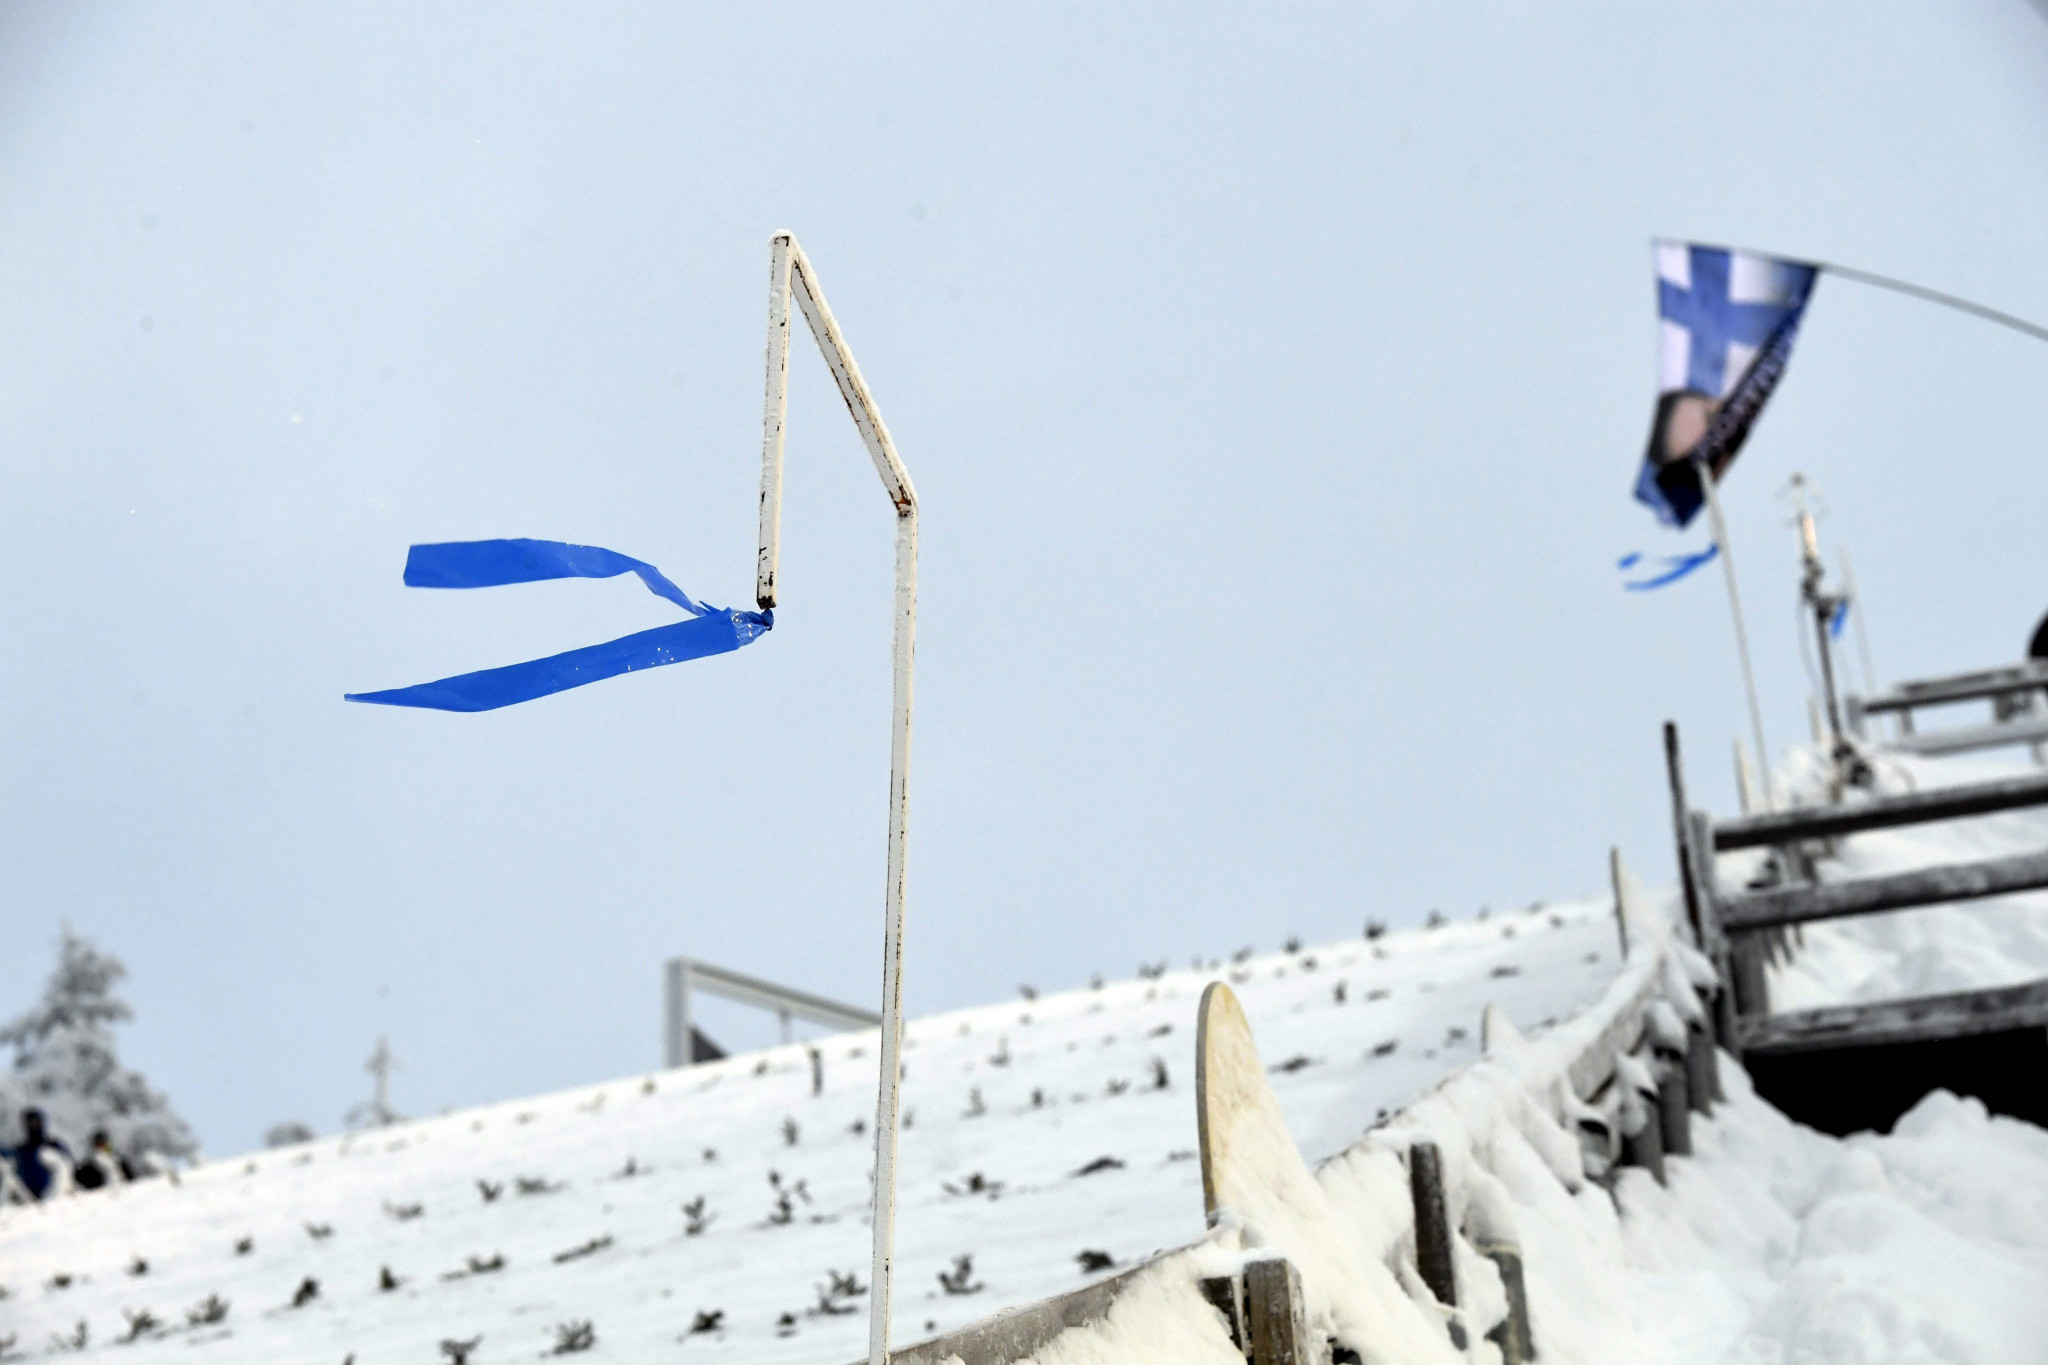 Strong winds led to the cancellation of the FIS Ski Jumping World Cup in Ruka  ©Getty Images